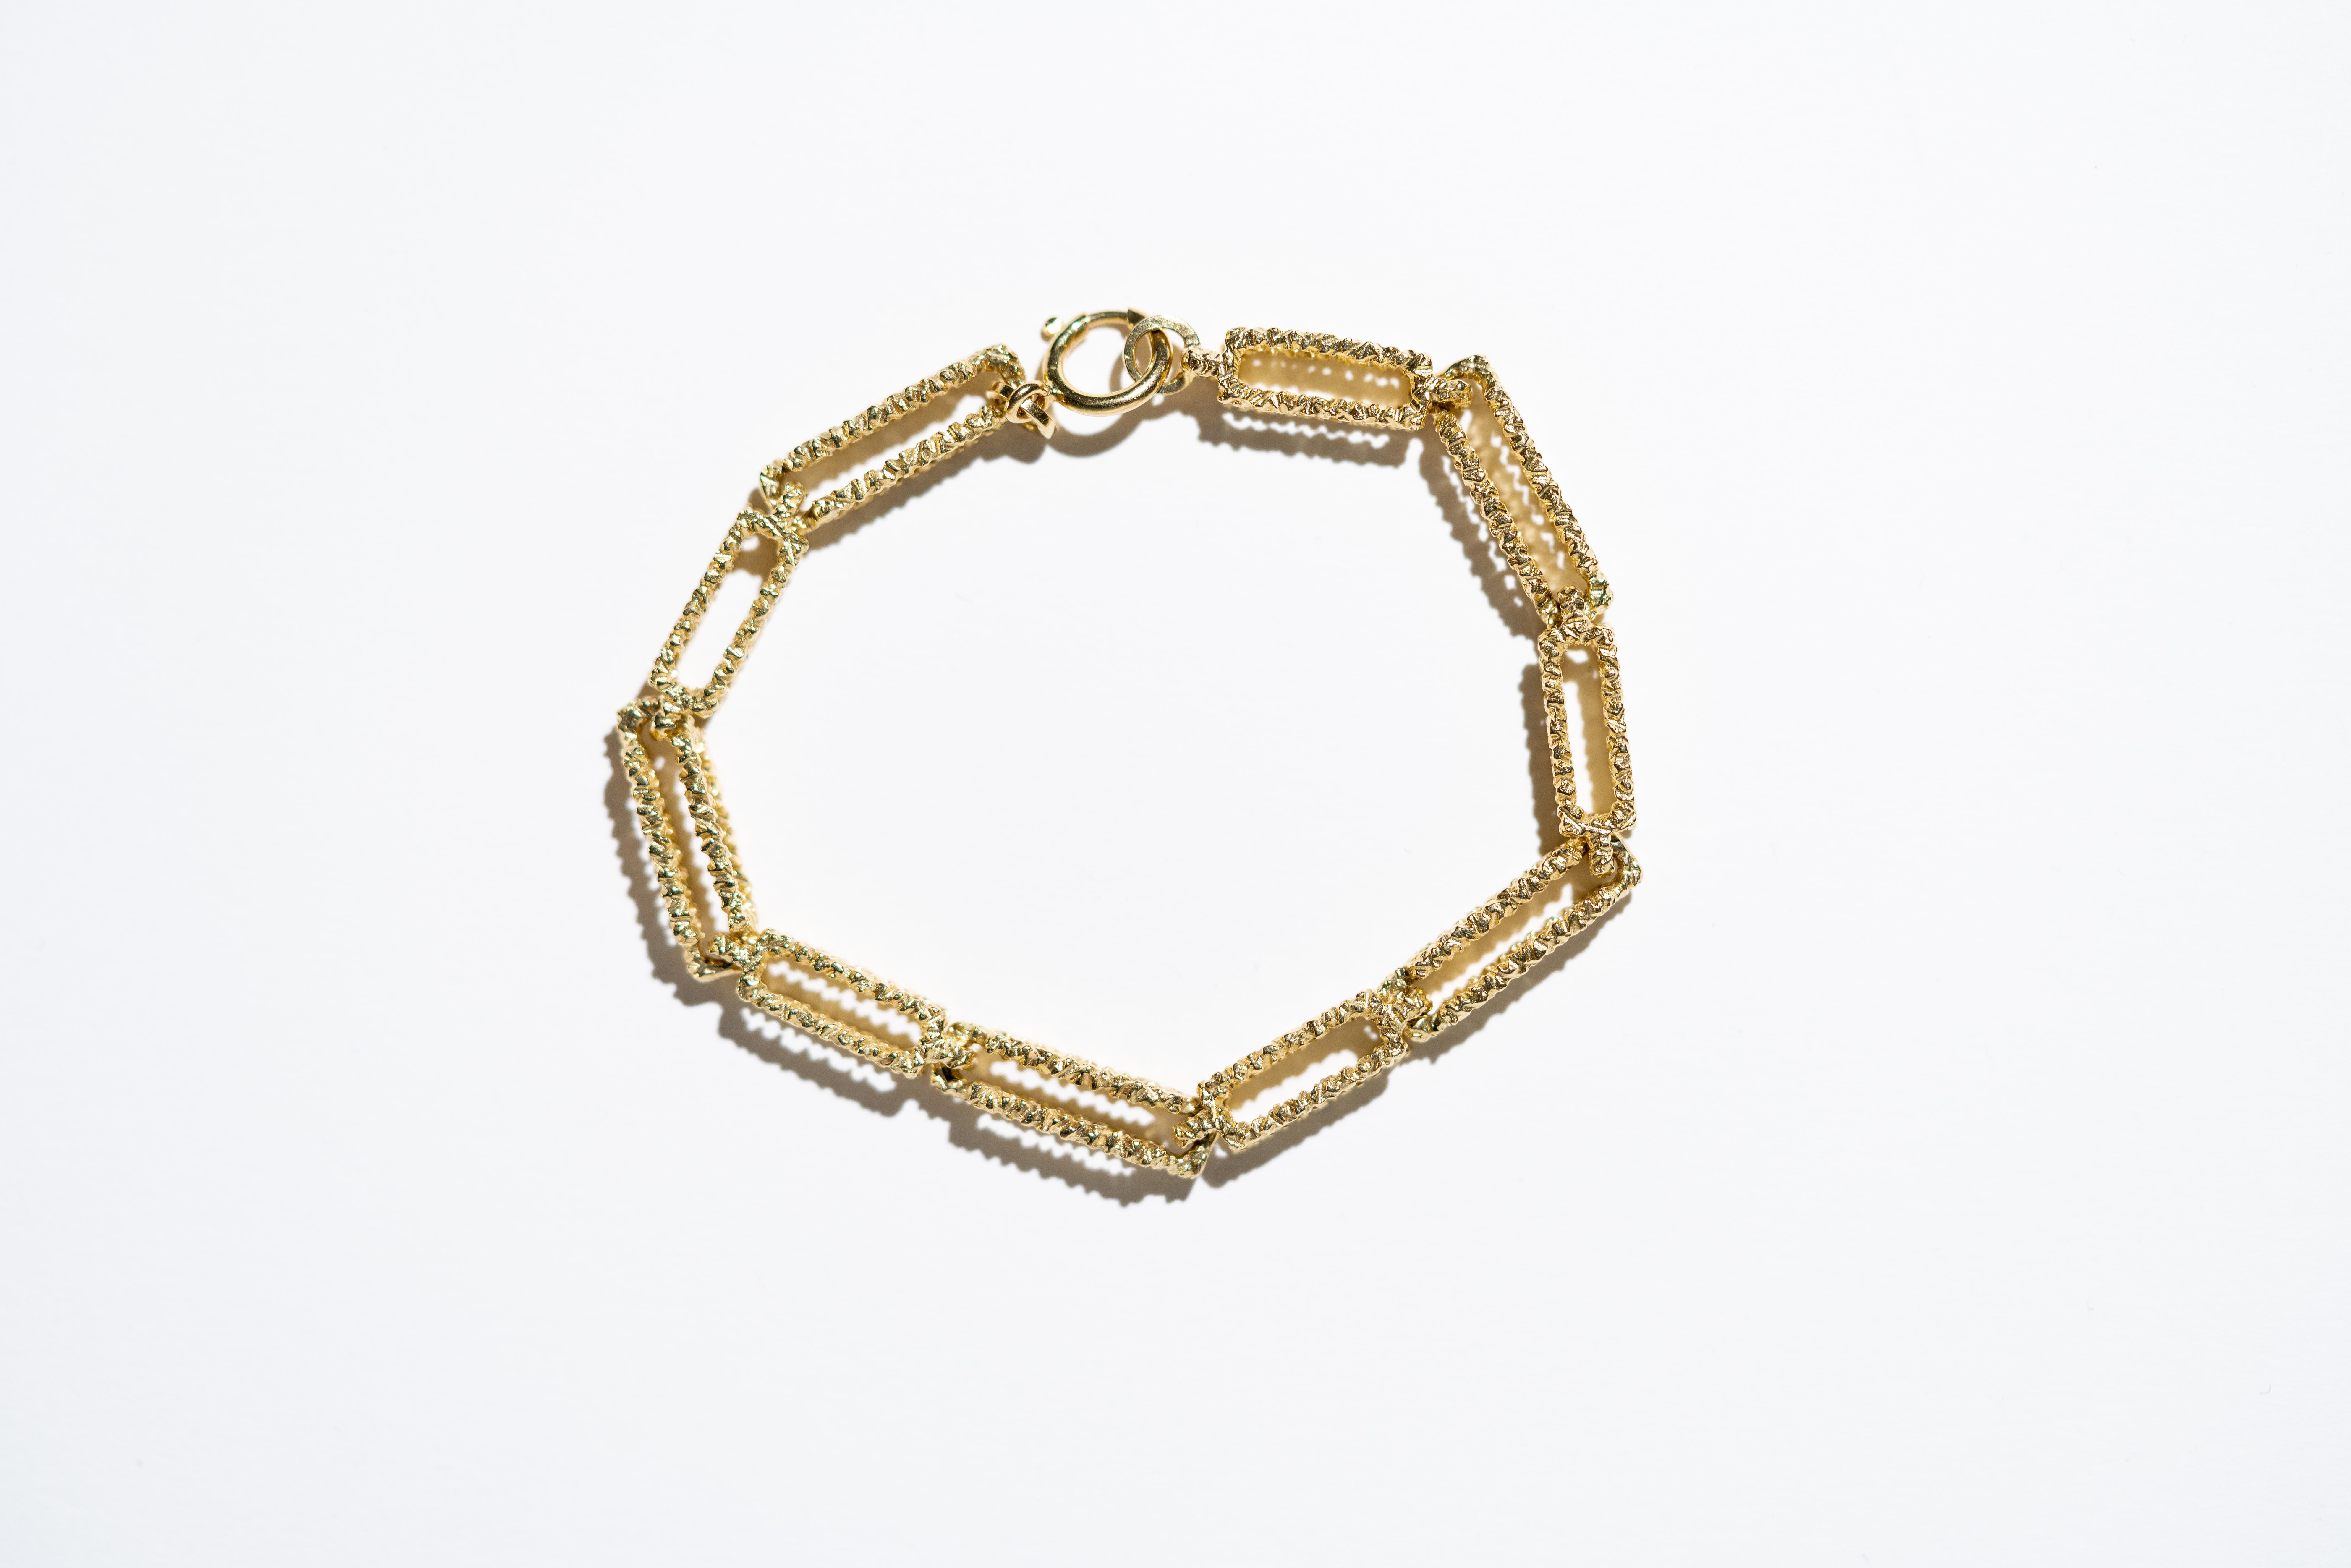 Beautifully textured bark effect 18 carat yellow gold link bracelet with 3D rectangular links. Crafted in Europe and purchased in Ireland in the 1970's, this bracelet is in pristine condition and looks as new. A glinting treasure of a jewel.

Length